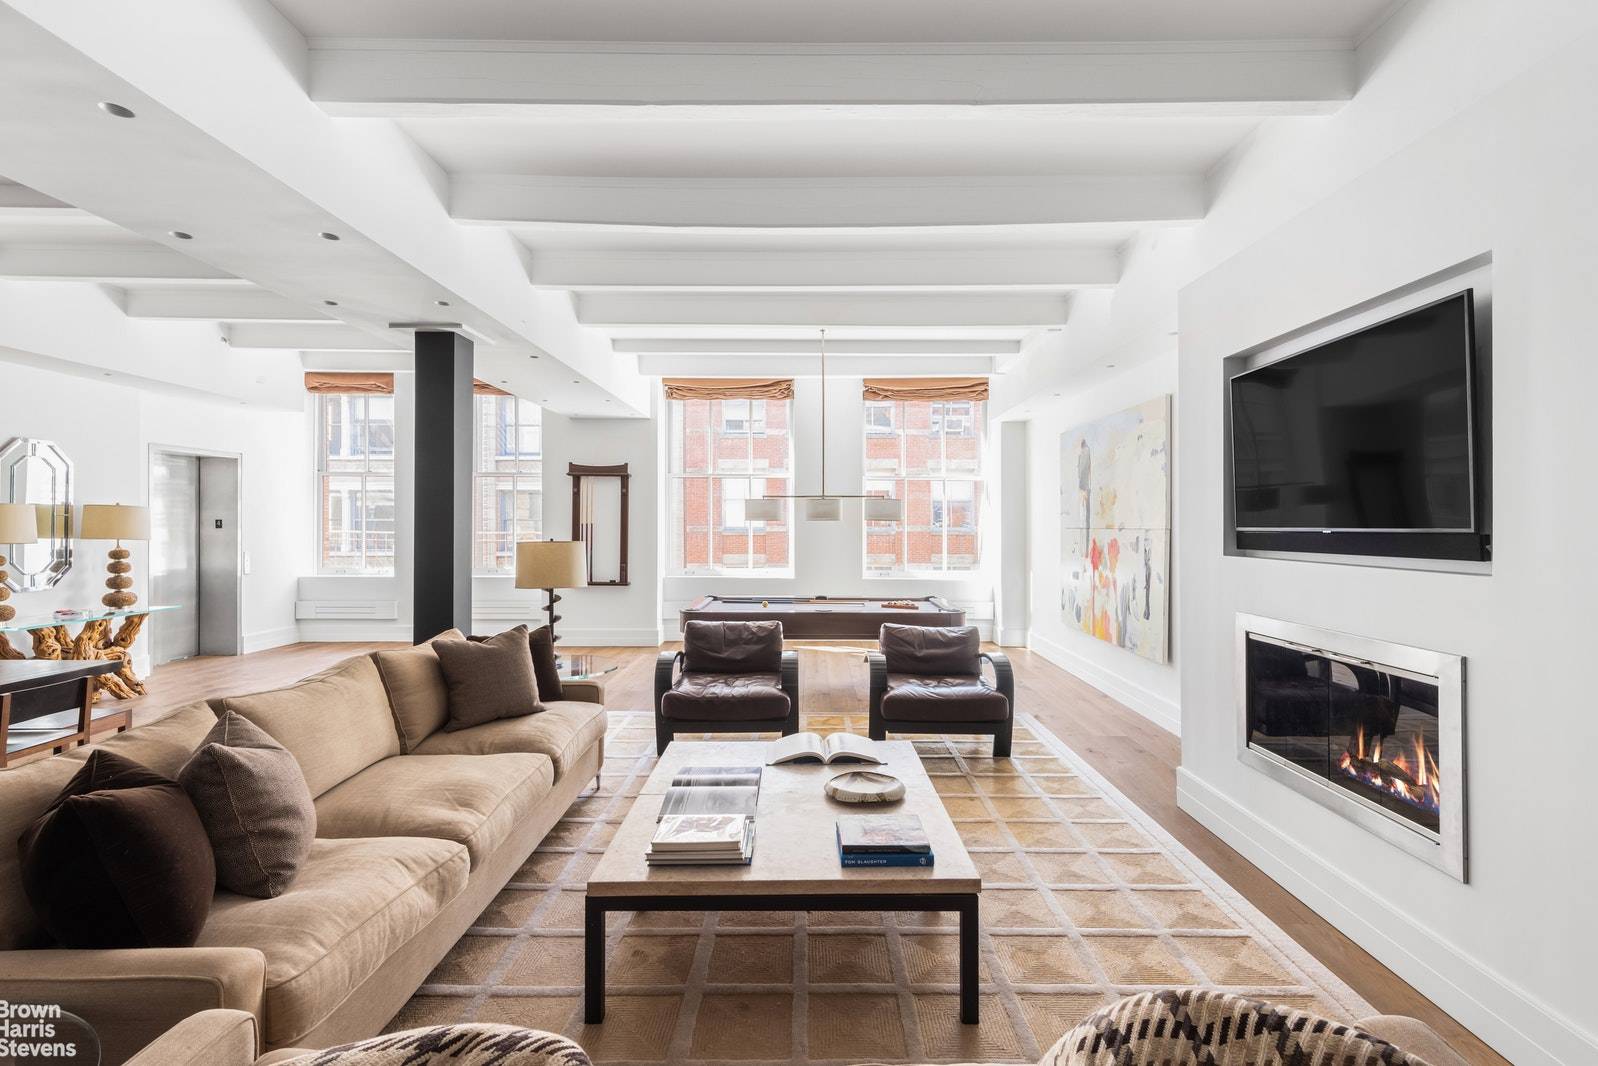 Welcome home to 104 Wooster, Apartment 4N, located in a boutique condominium on one of the finest blocks in Soho.